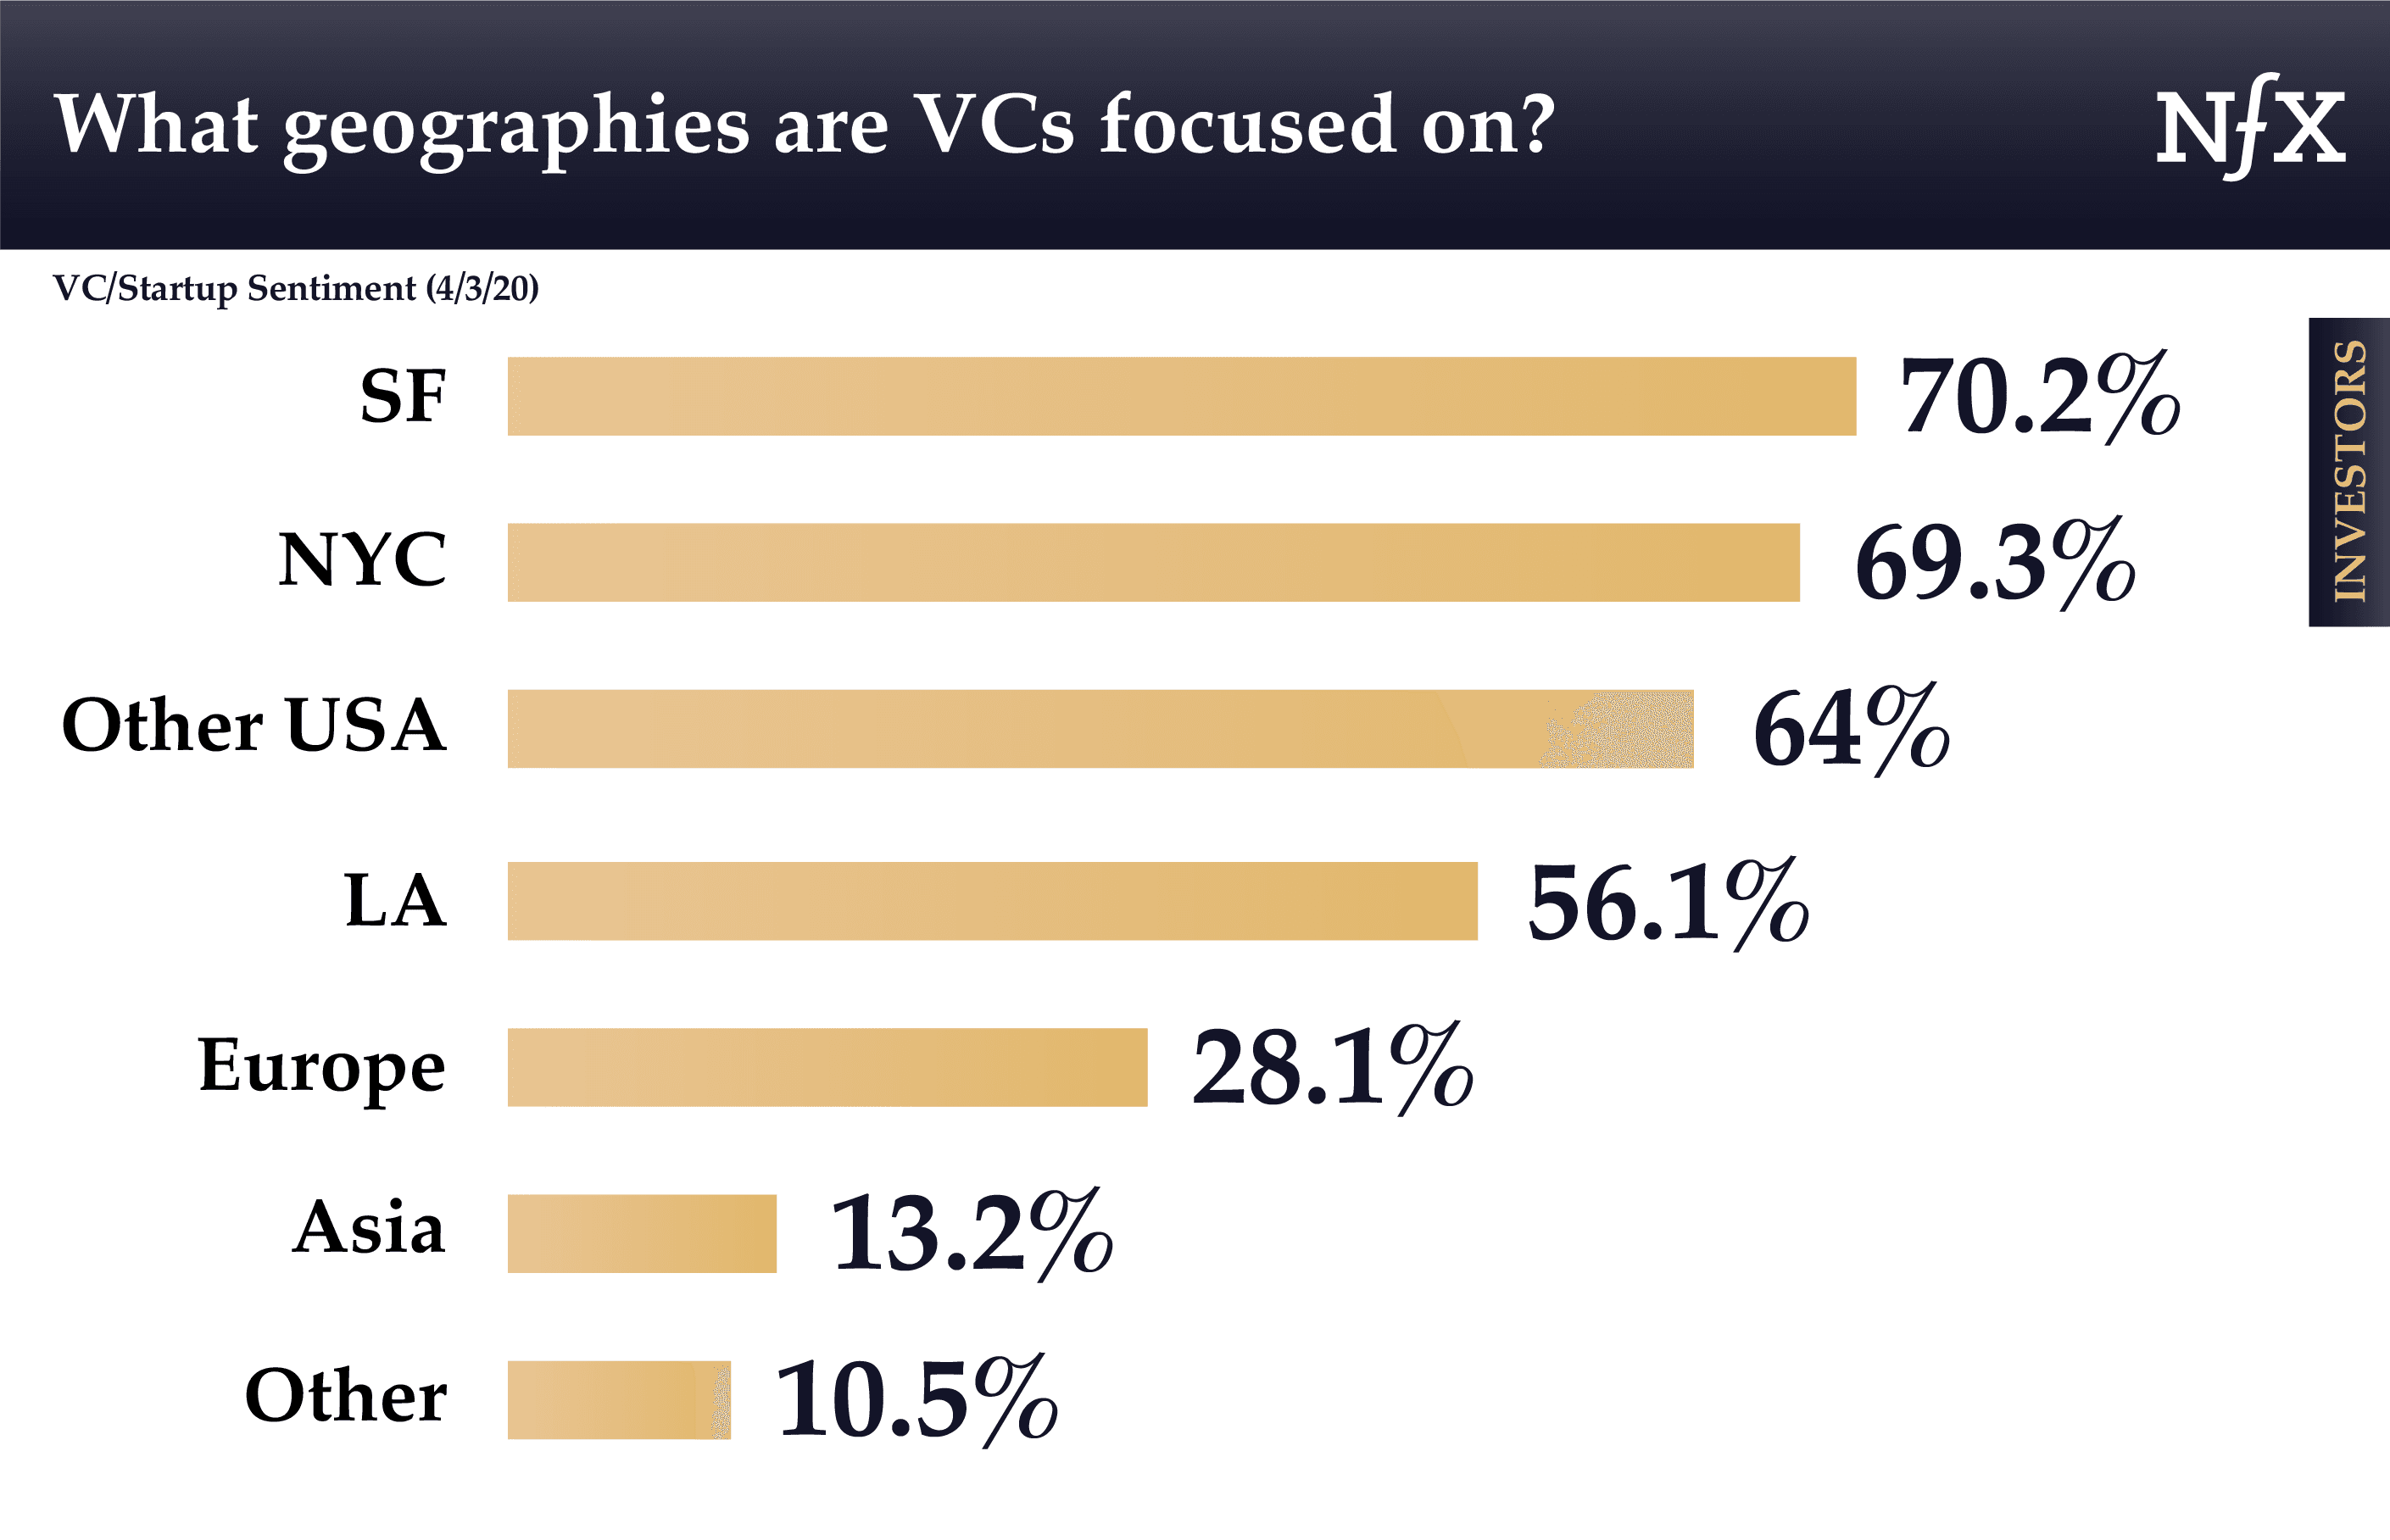 What geographies are VCs focused on?